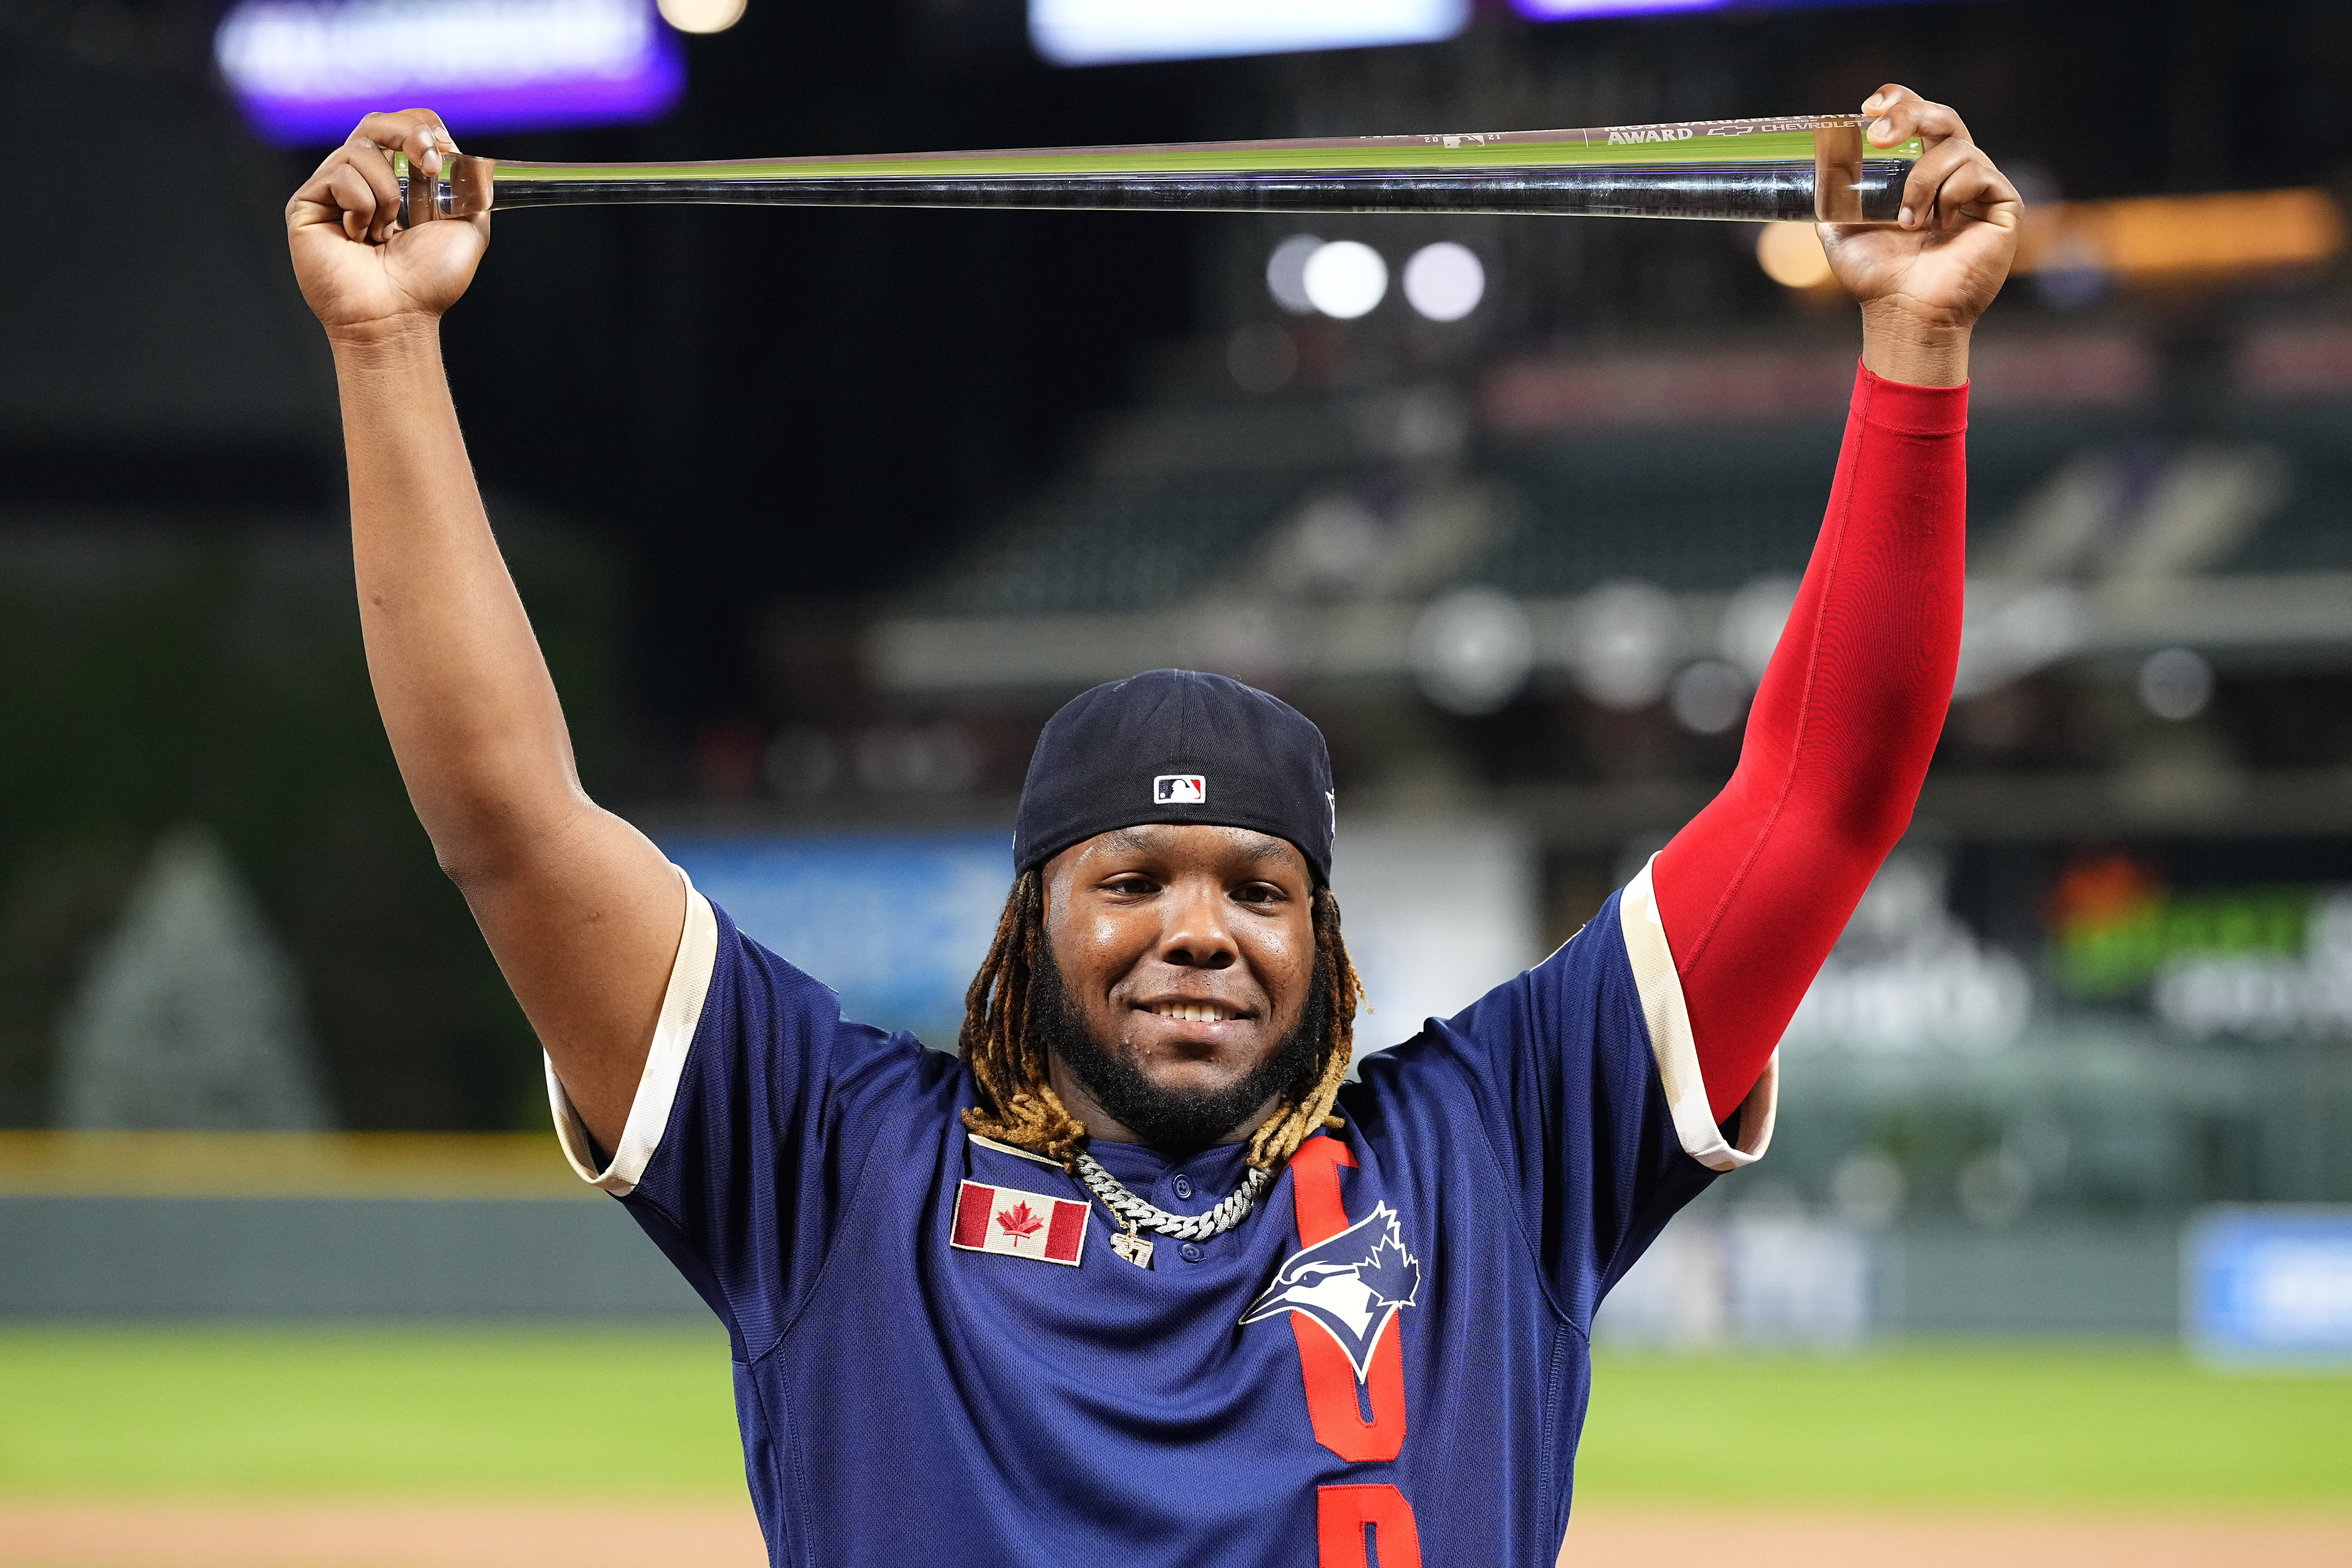 Vlad Guerrero shared fantastic throwback photos with his son ahead